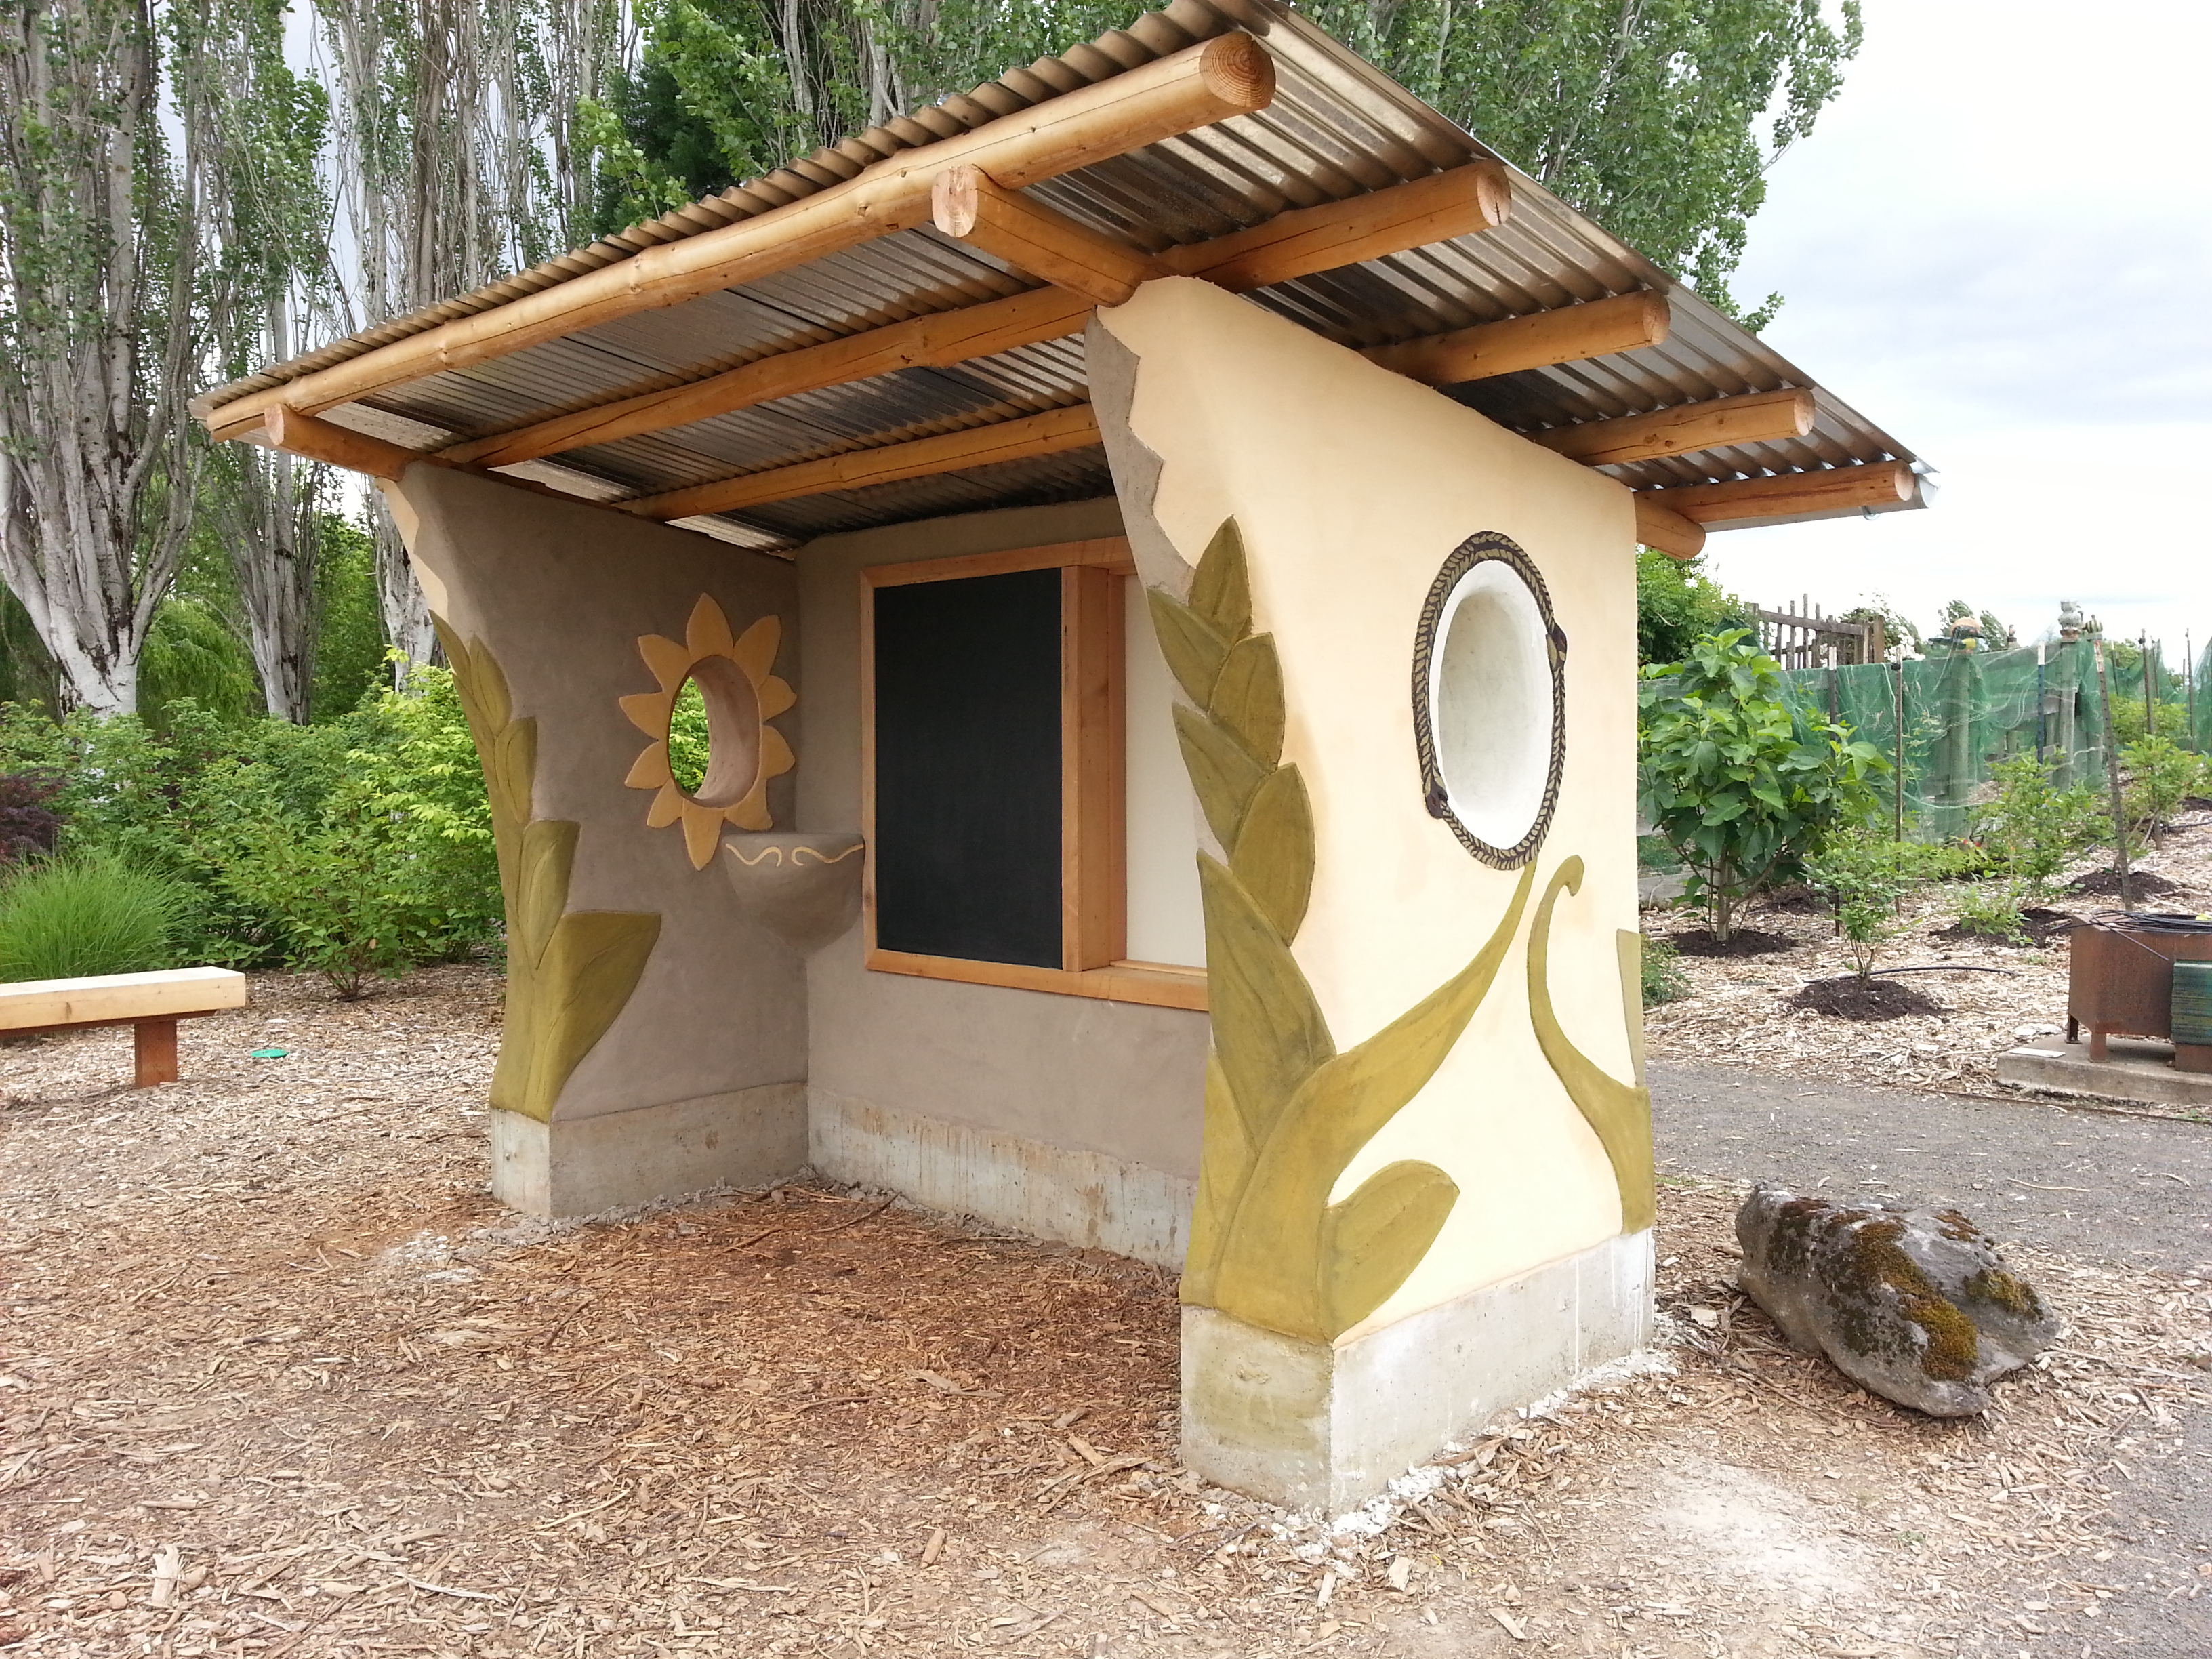 Kiosk, Portland Community College | "As part of a class I taught at Portland Community College's Rock Creek campus I led students and Learning Garden volunteers to build and plaster this informational welcome kiosk."